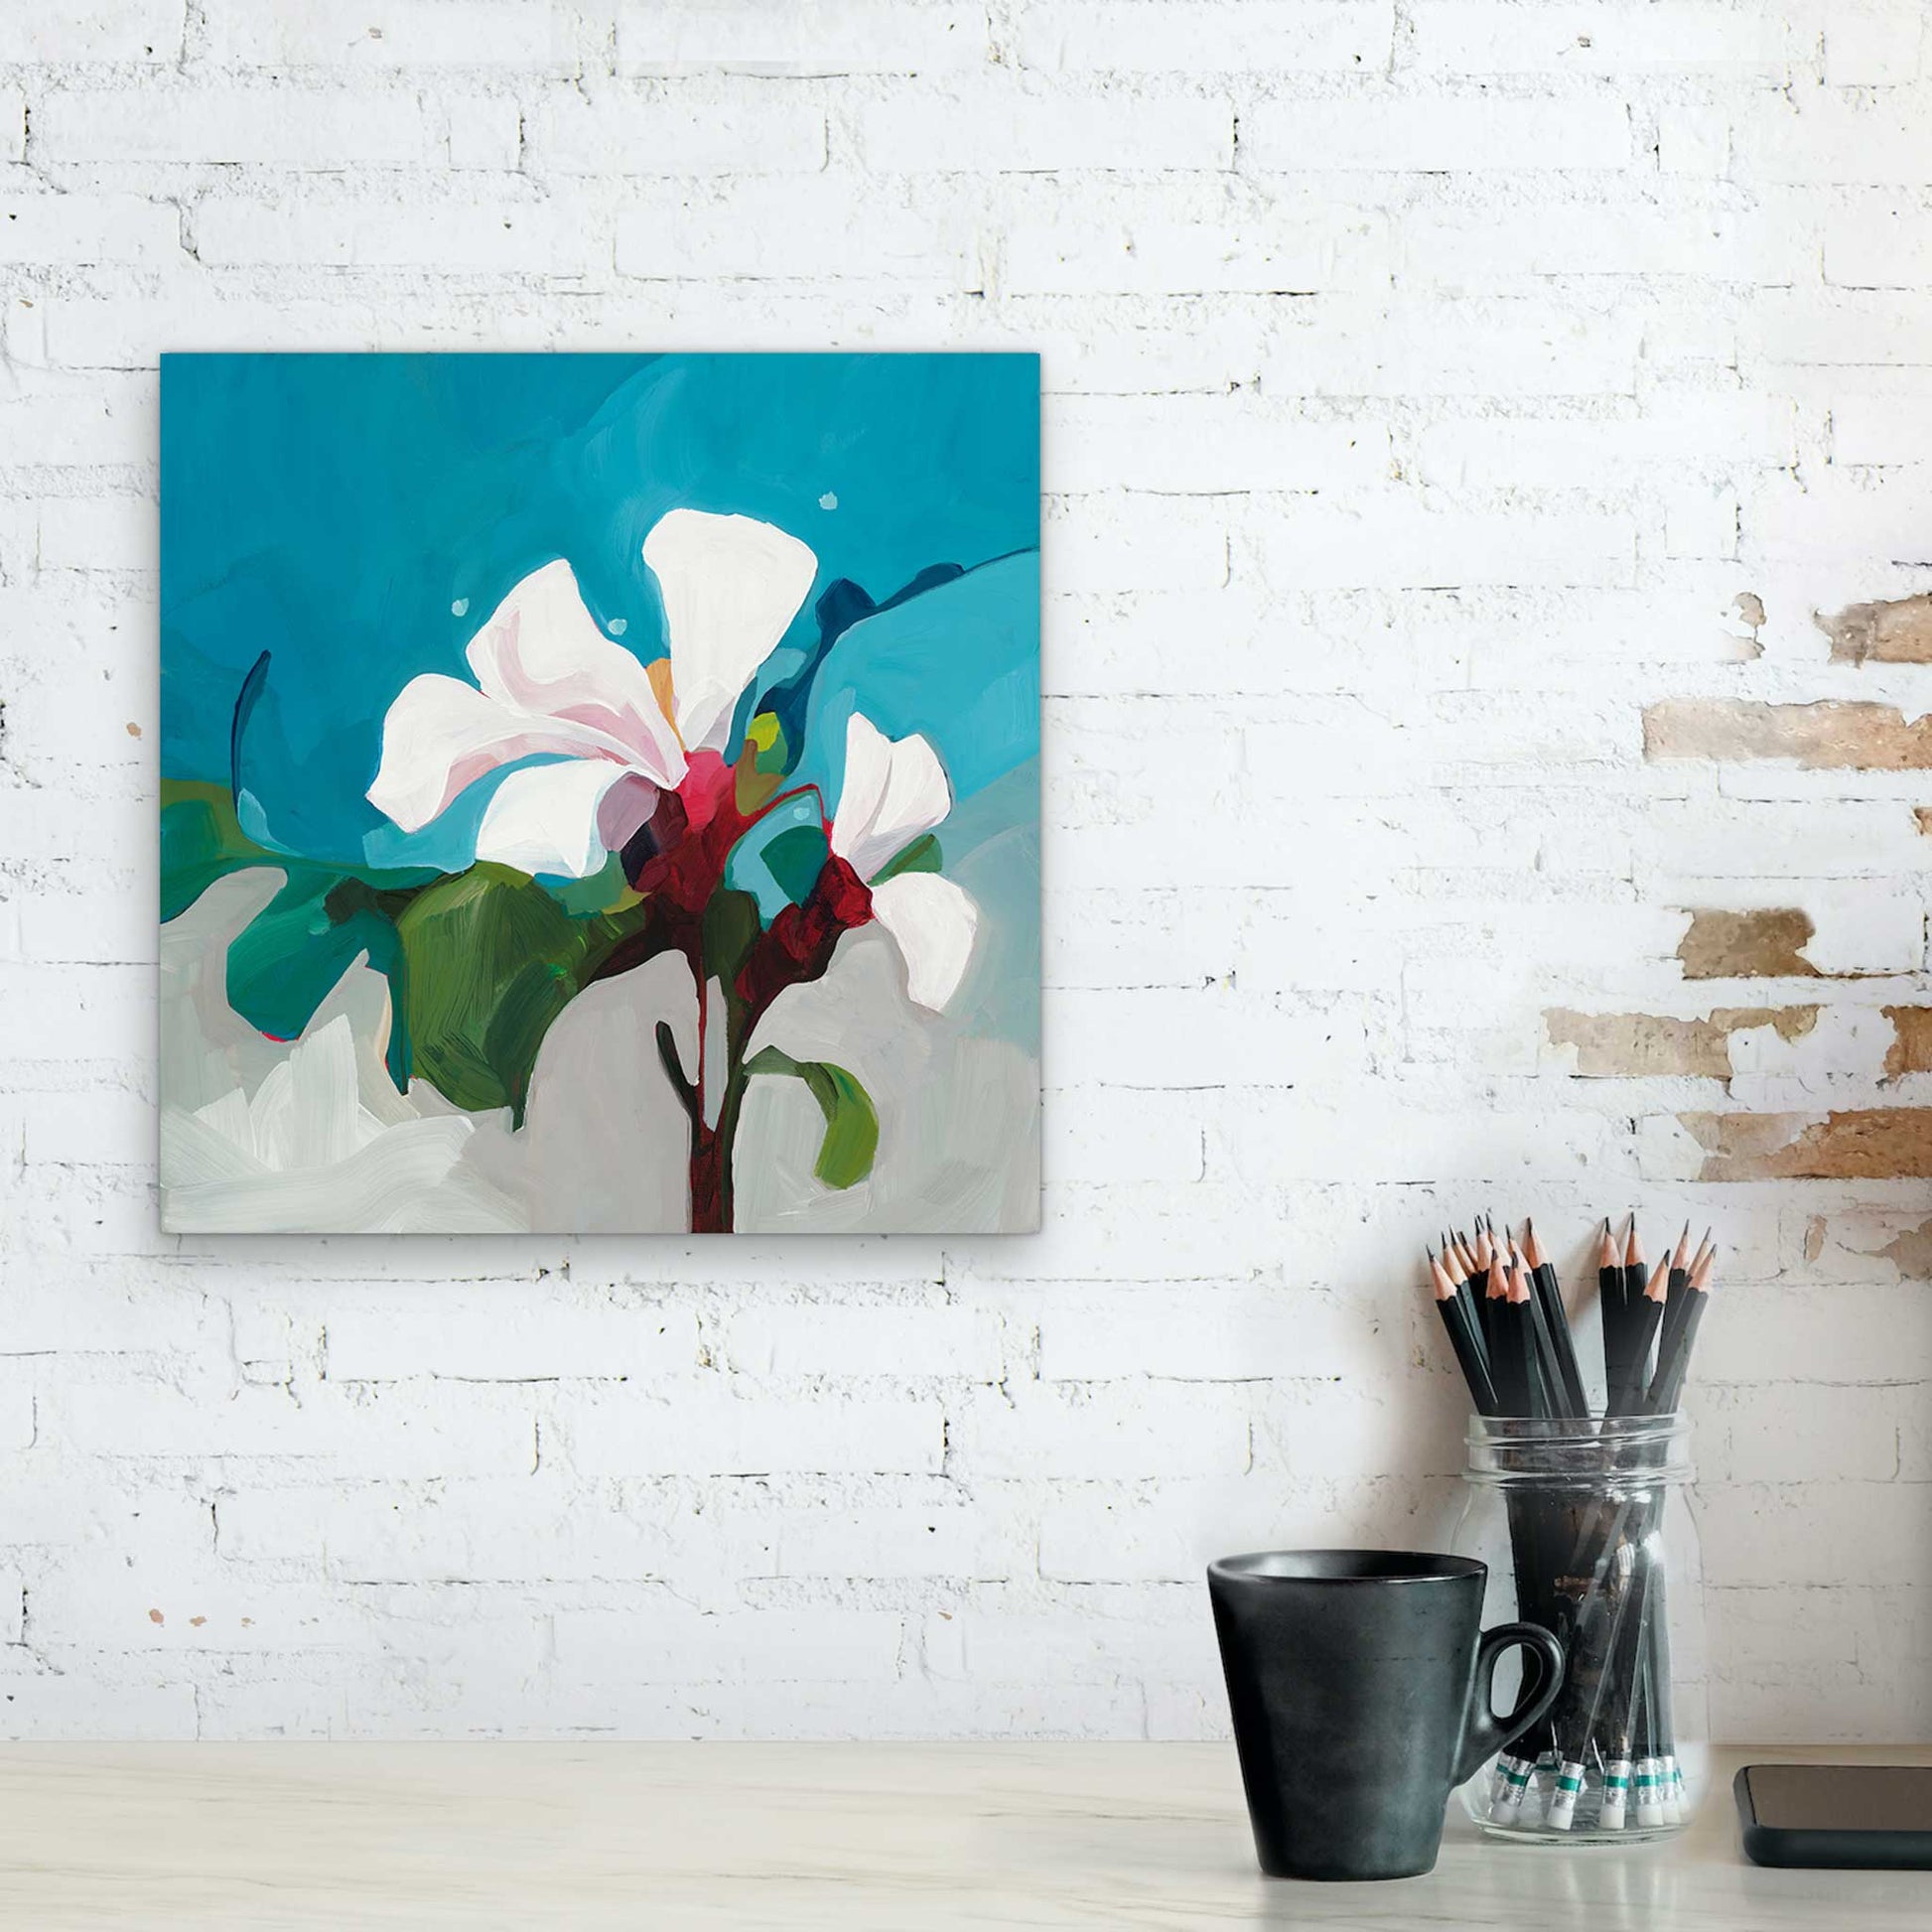 acrylic flower painting canvas floral art abstract flower by Canadian artist Susannah Bleasby